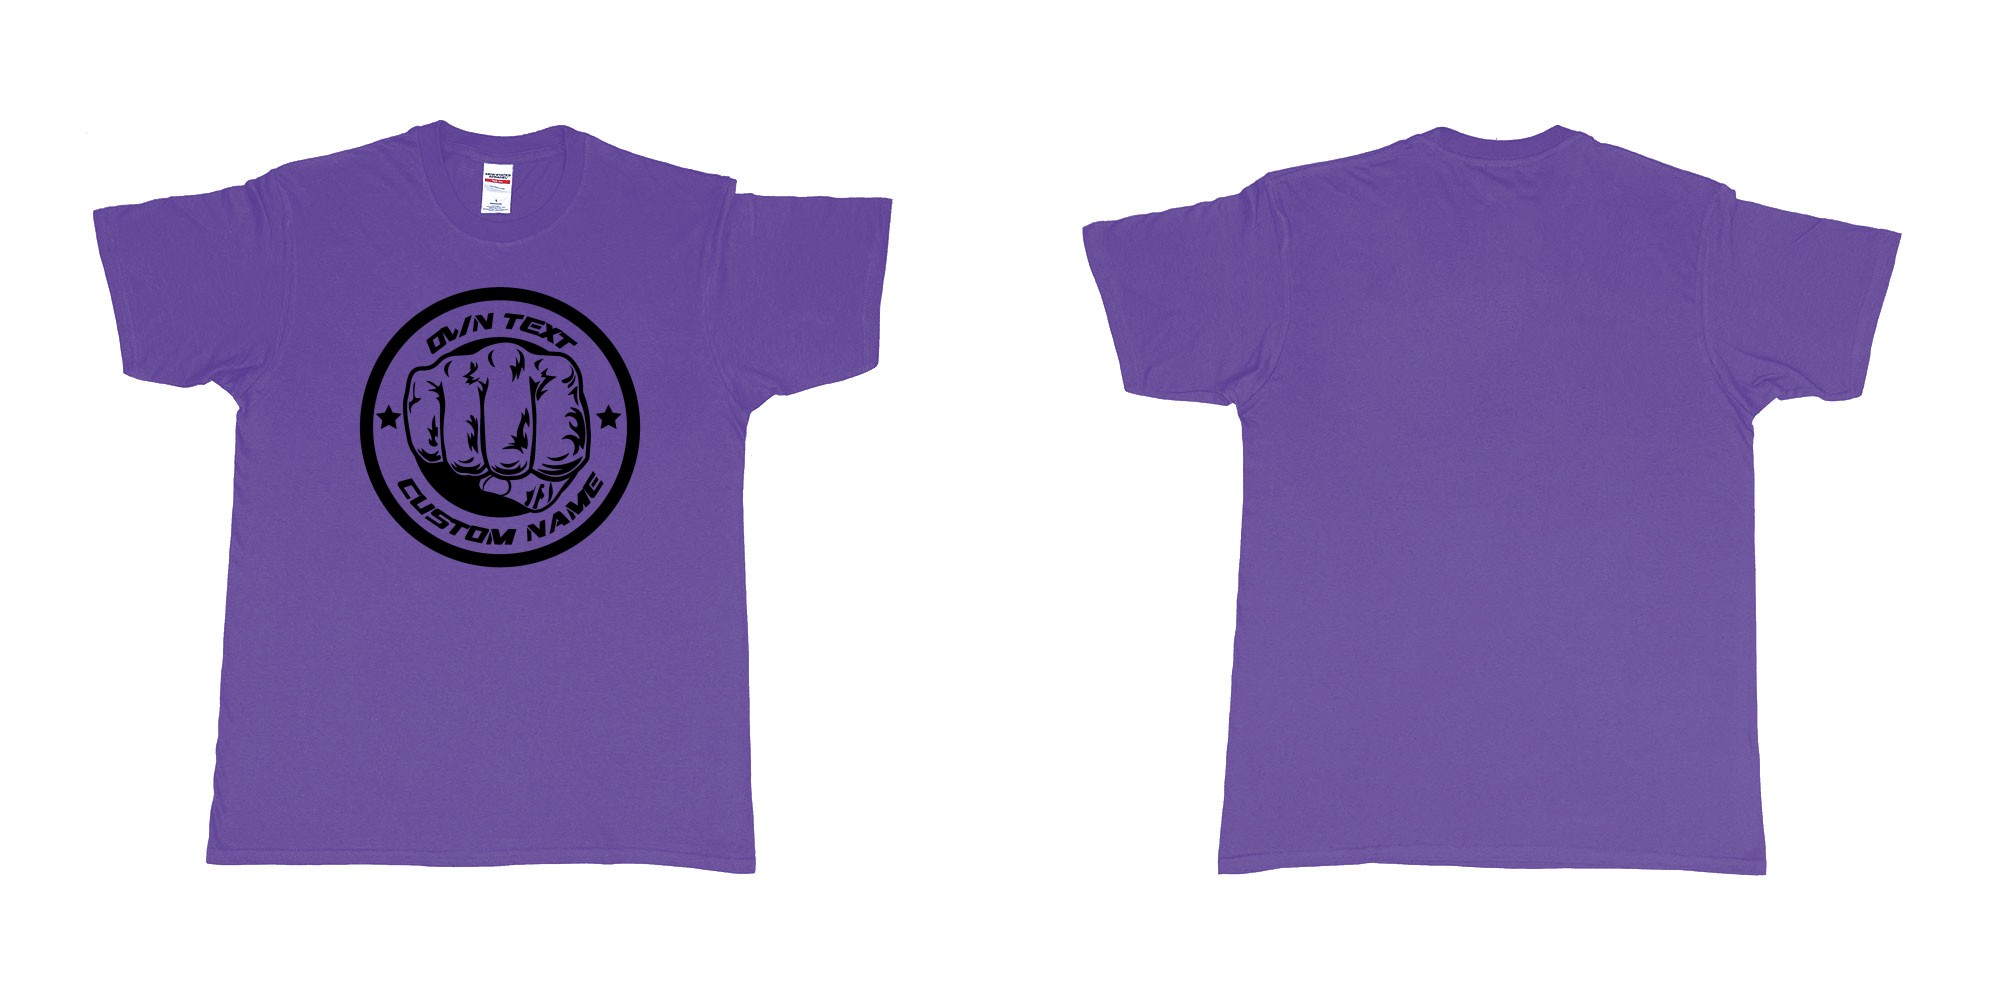 Custom tshirt design ufc mma fist custom logo in fabric color purple choice your own text made in Bali by The Pirate Way